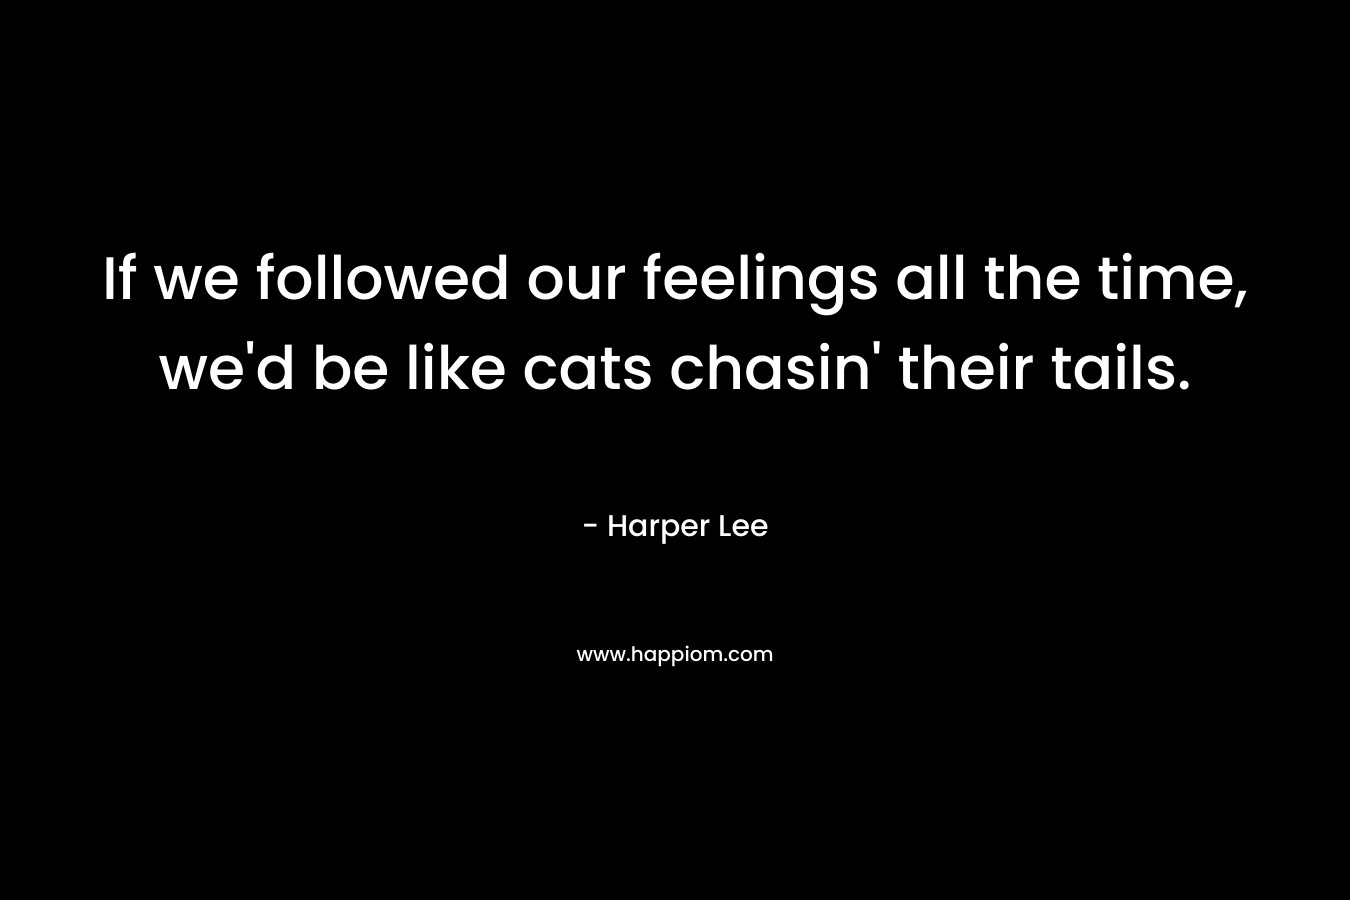 If we followed our feelings all the time, we’d be like cats chasin’ their tails. – Harper Lee